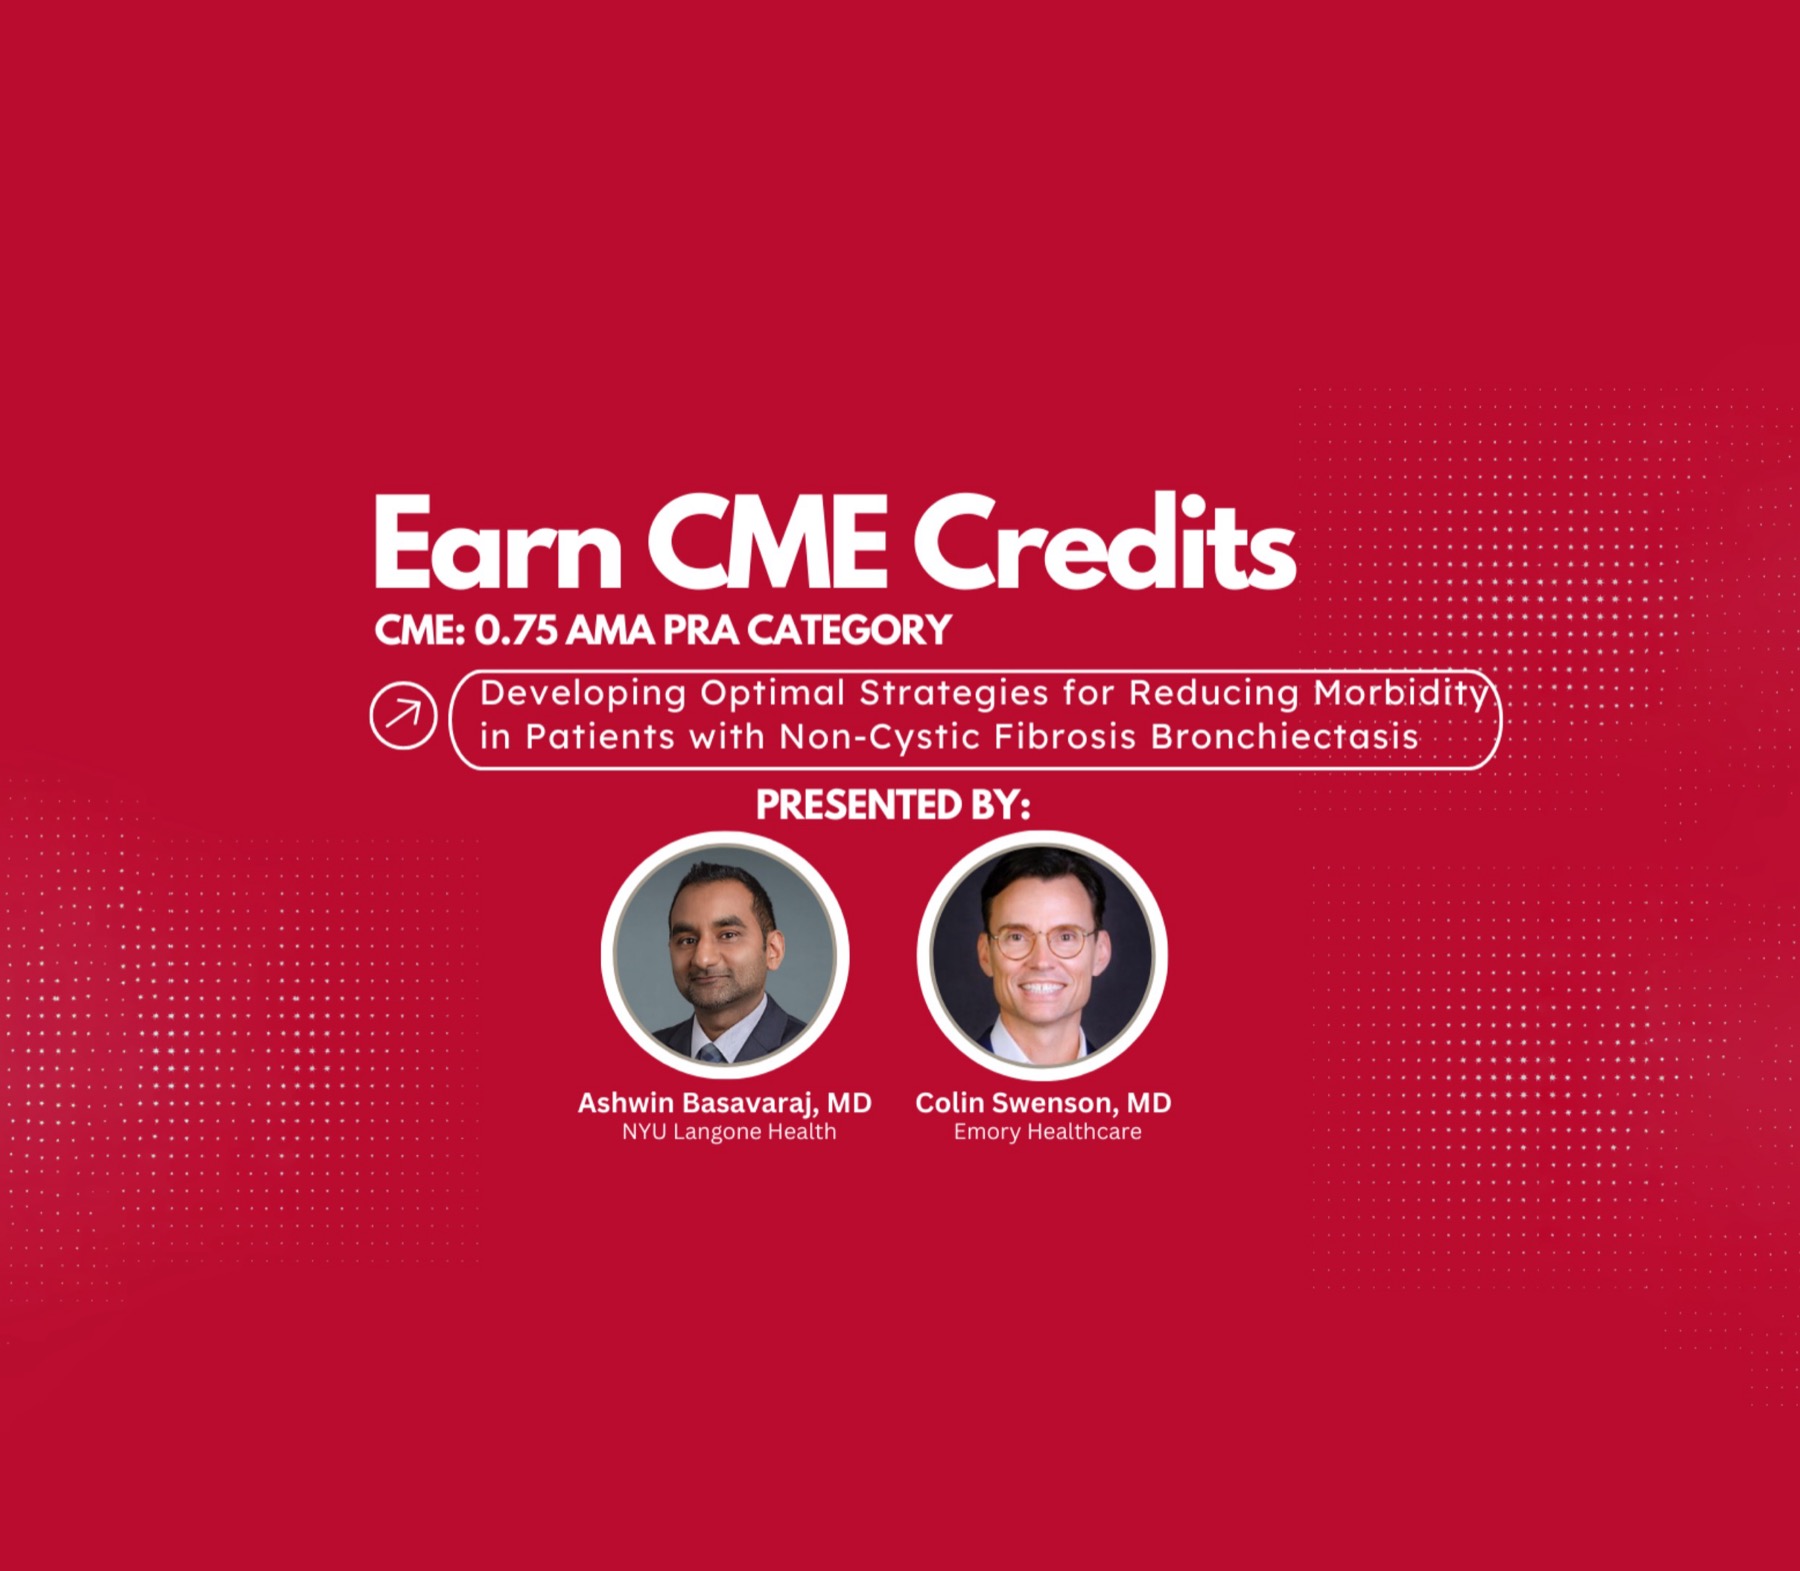 Earn CME Credits, CME: 0.75 AMA PRA Category. Developing optimal strategies for reducing morbidity in patients with non-cystic fibrosis bronchiectasis. Ashwin Basavaraj, MD and Colin Swenson, MD